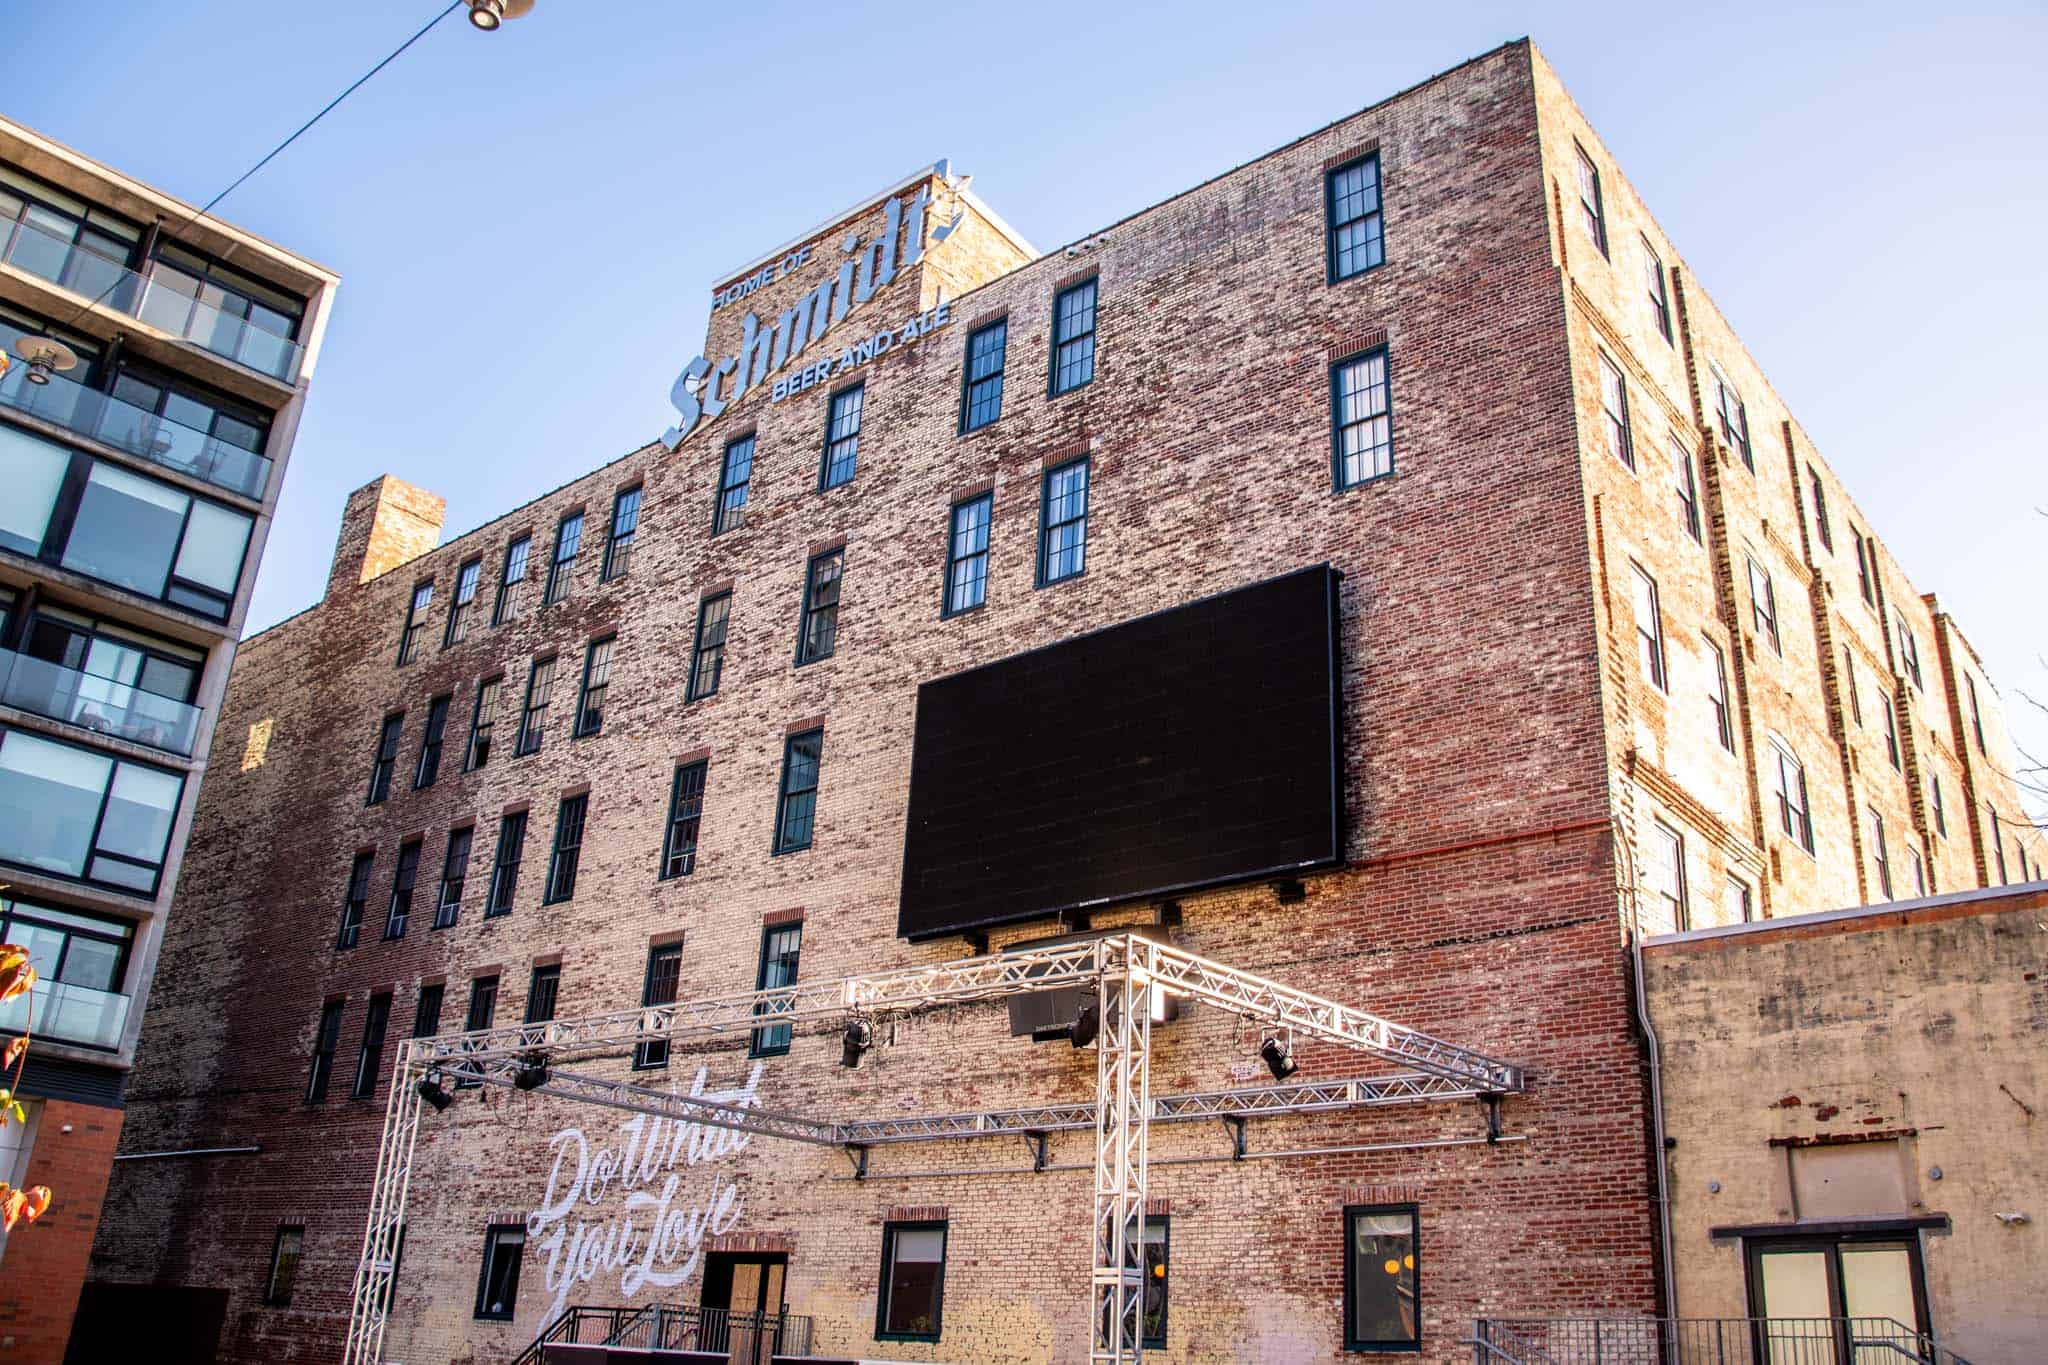 Large brick building with sign: Home of Schmidt Beer and Ale 